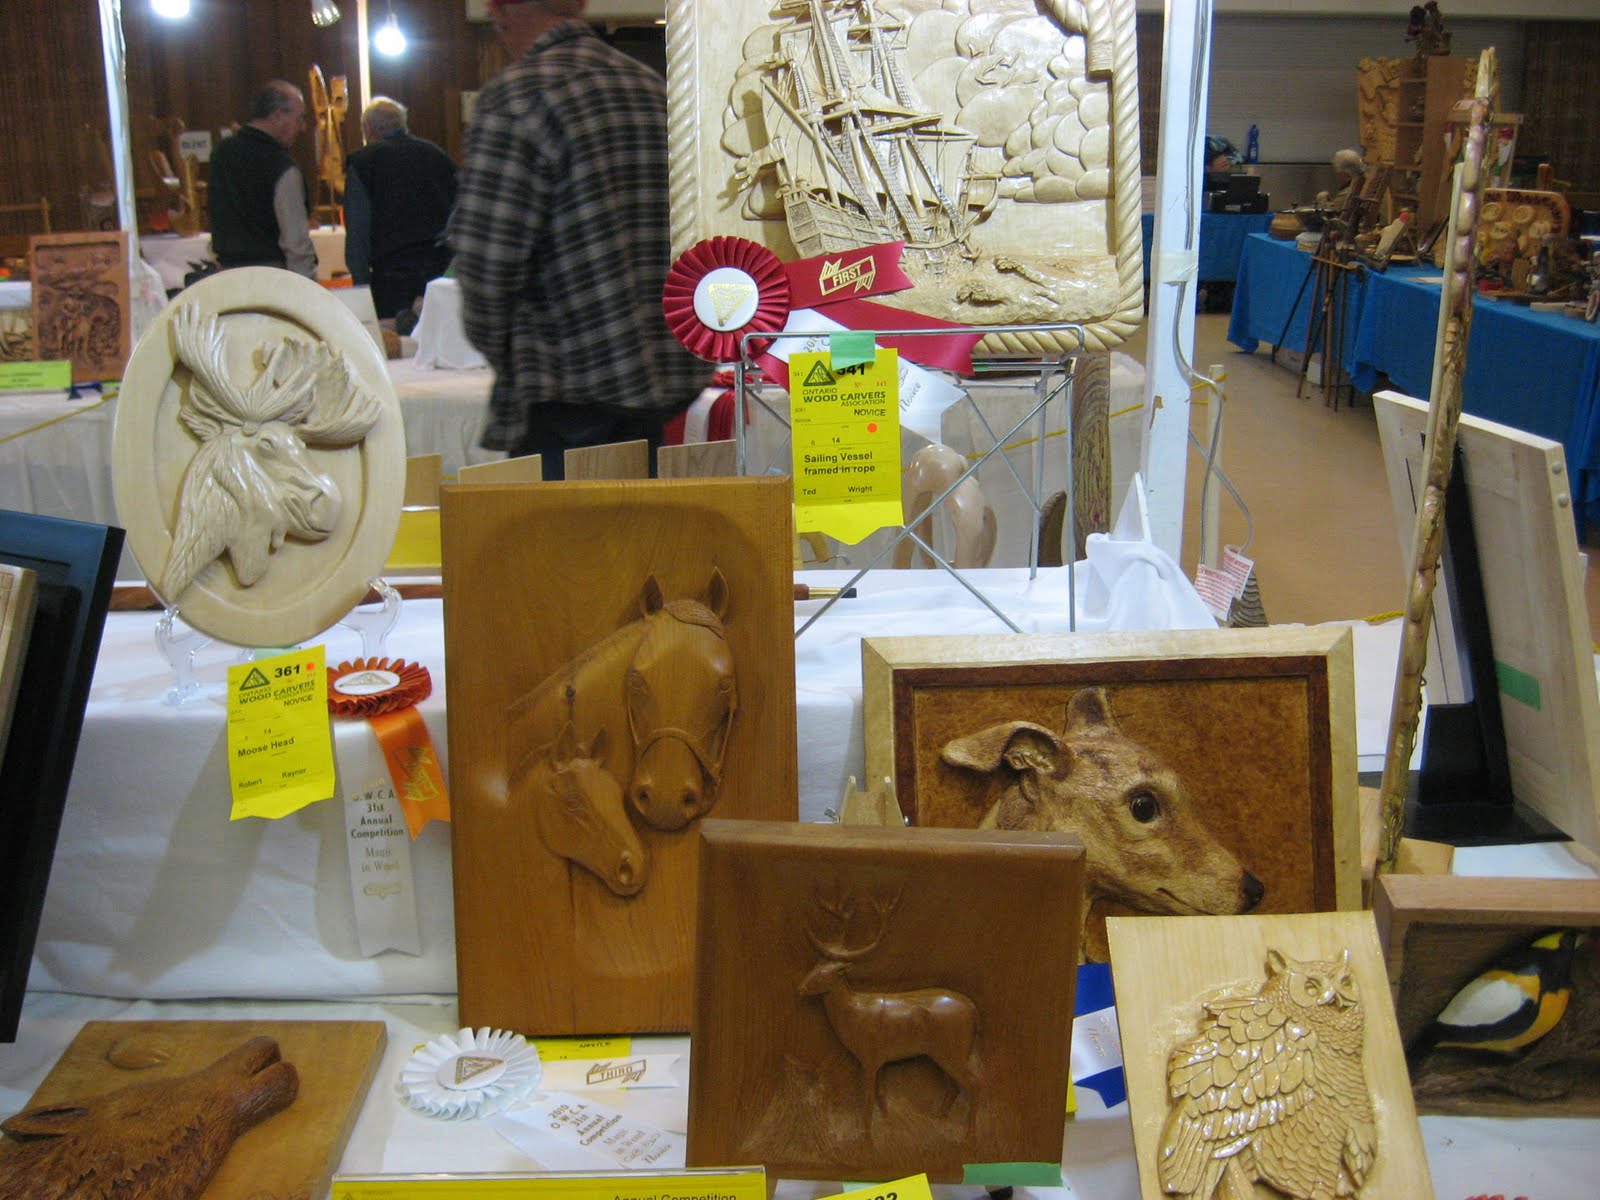 carverswoodshop: some photos of the ontario wood carving show 2010